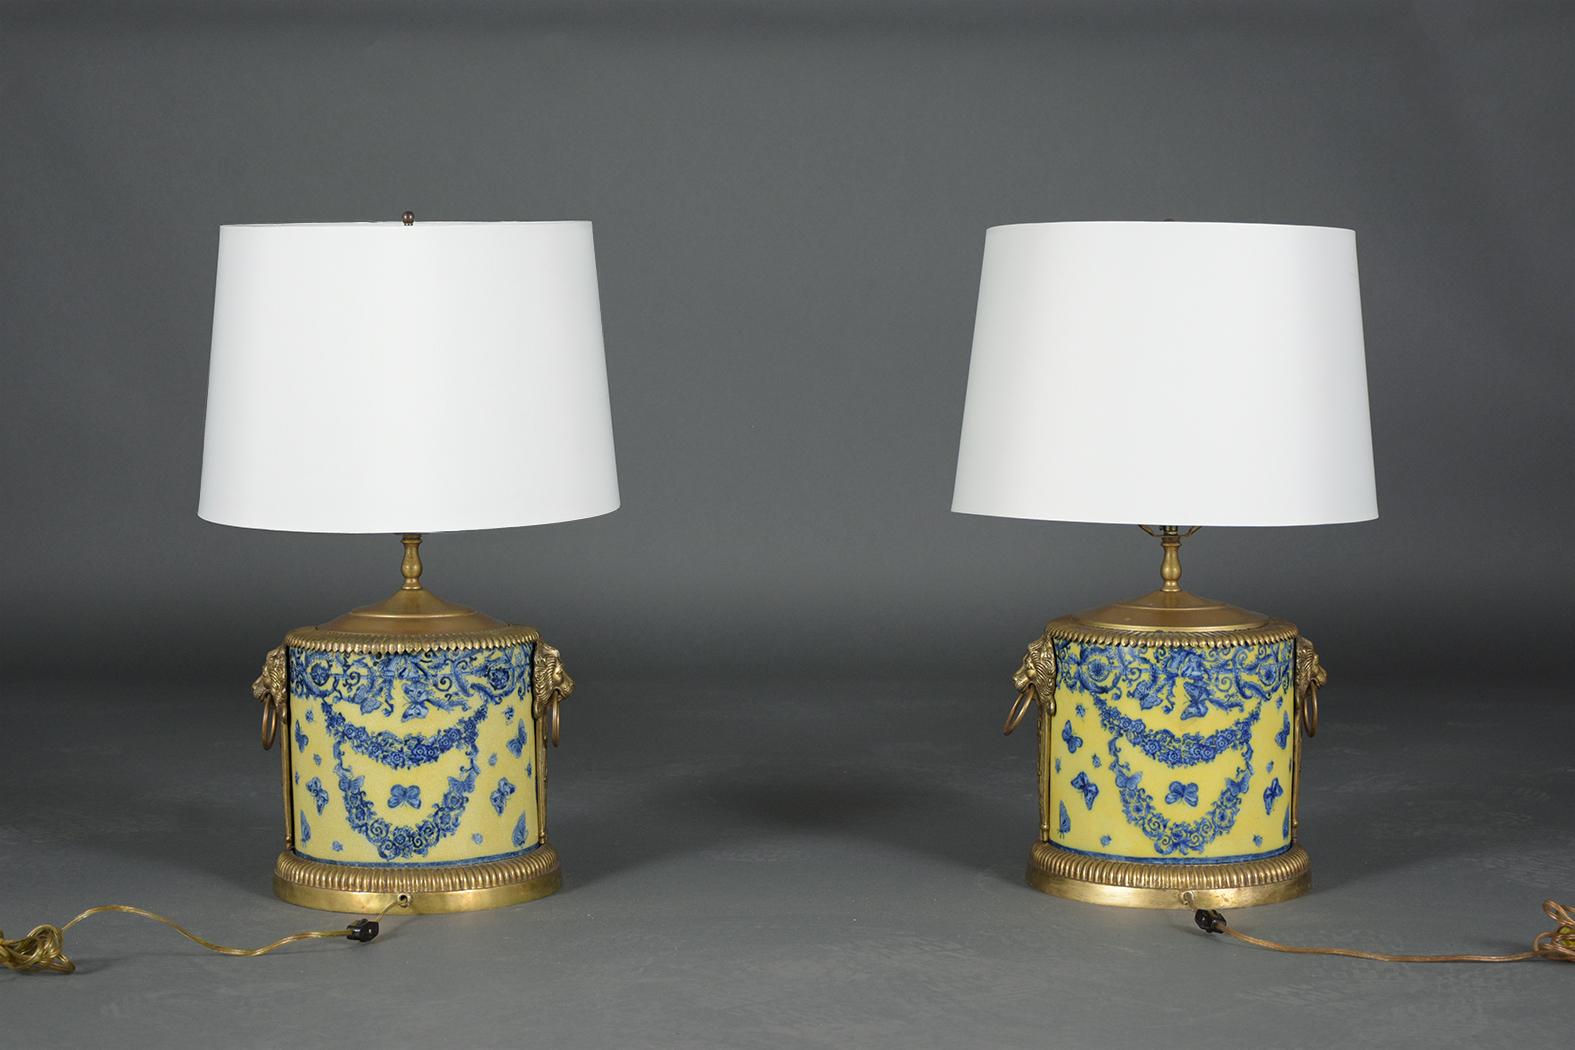 Pair of French Chinoiserie Porcelain & Brass Table Lamps with Floral Design For Sale 9